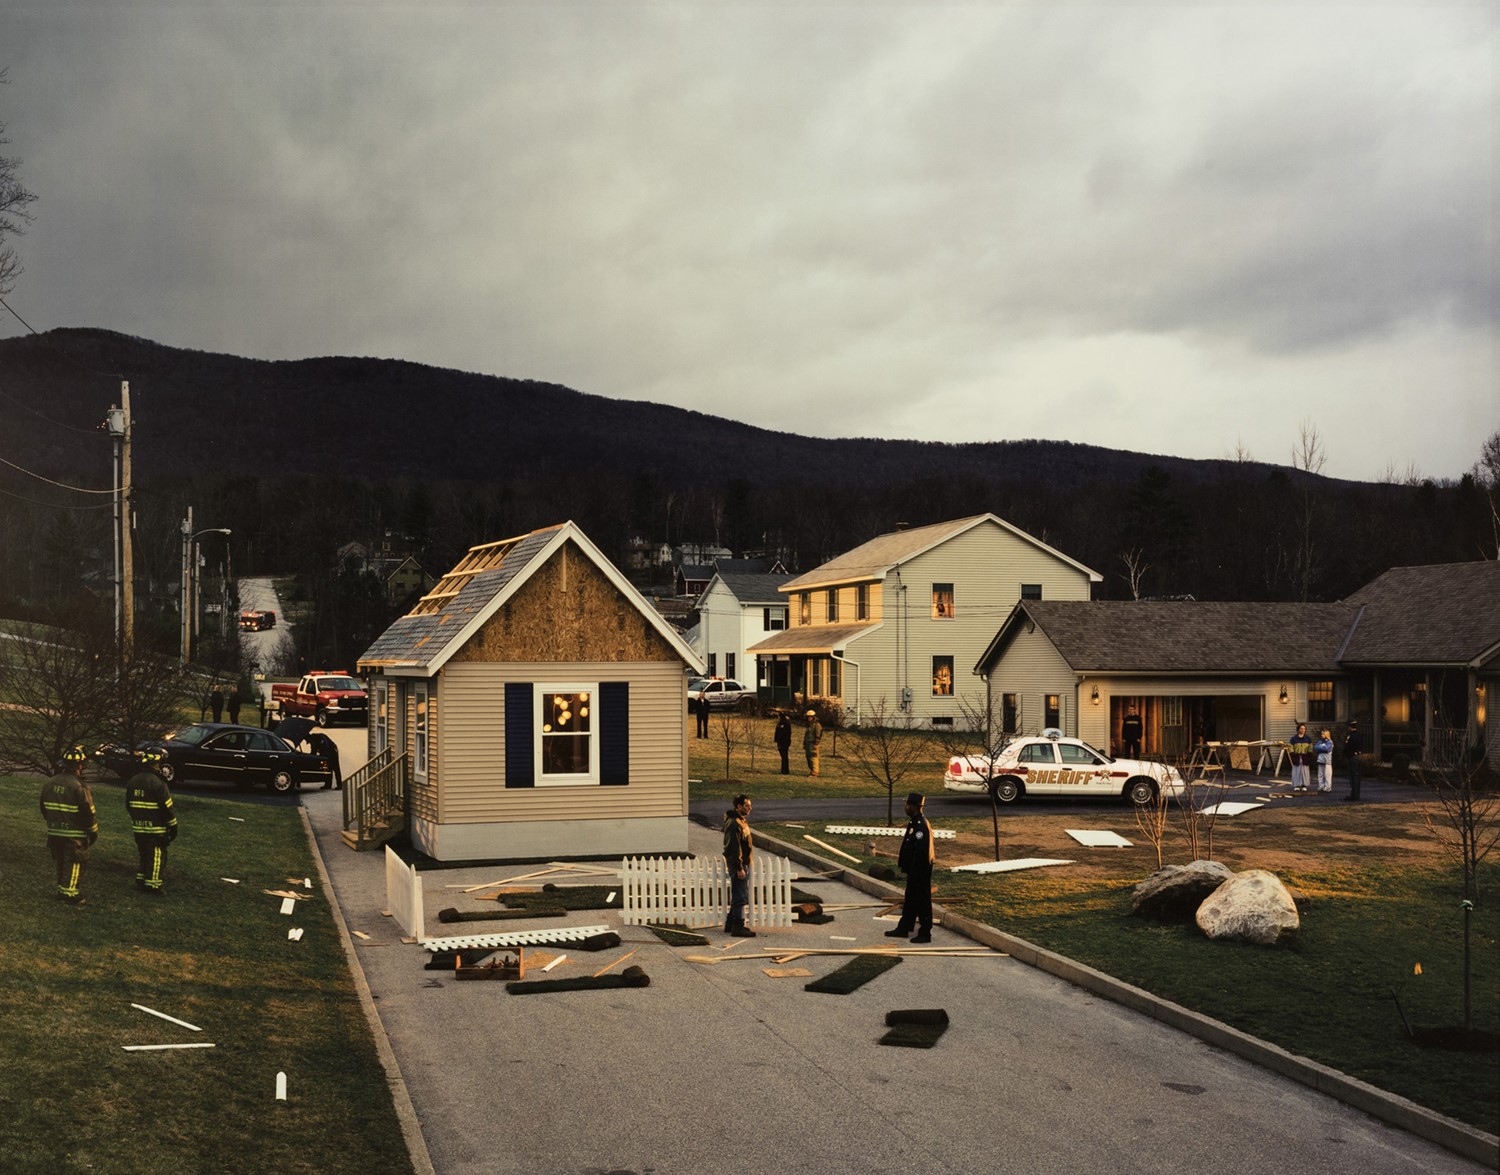 Gregory Crewdson, UNTITLED (HOUSE IN THE ROAD)